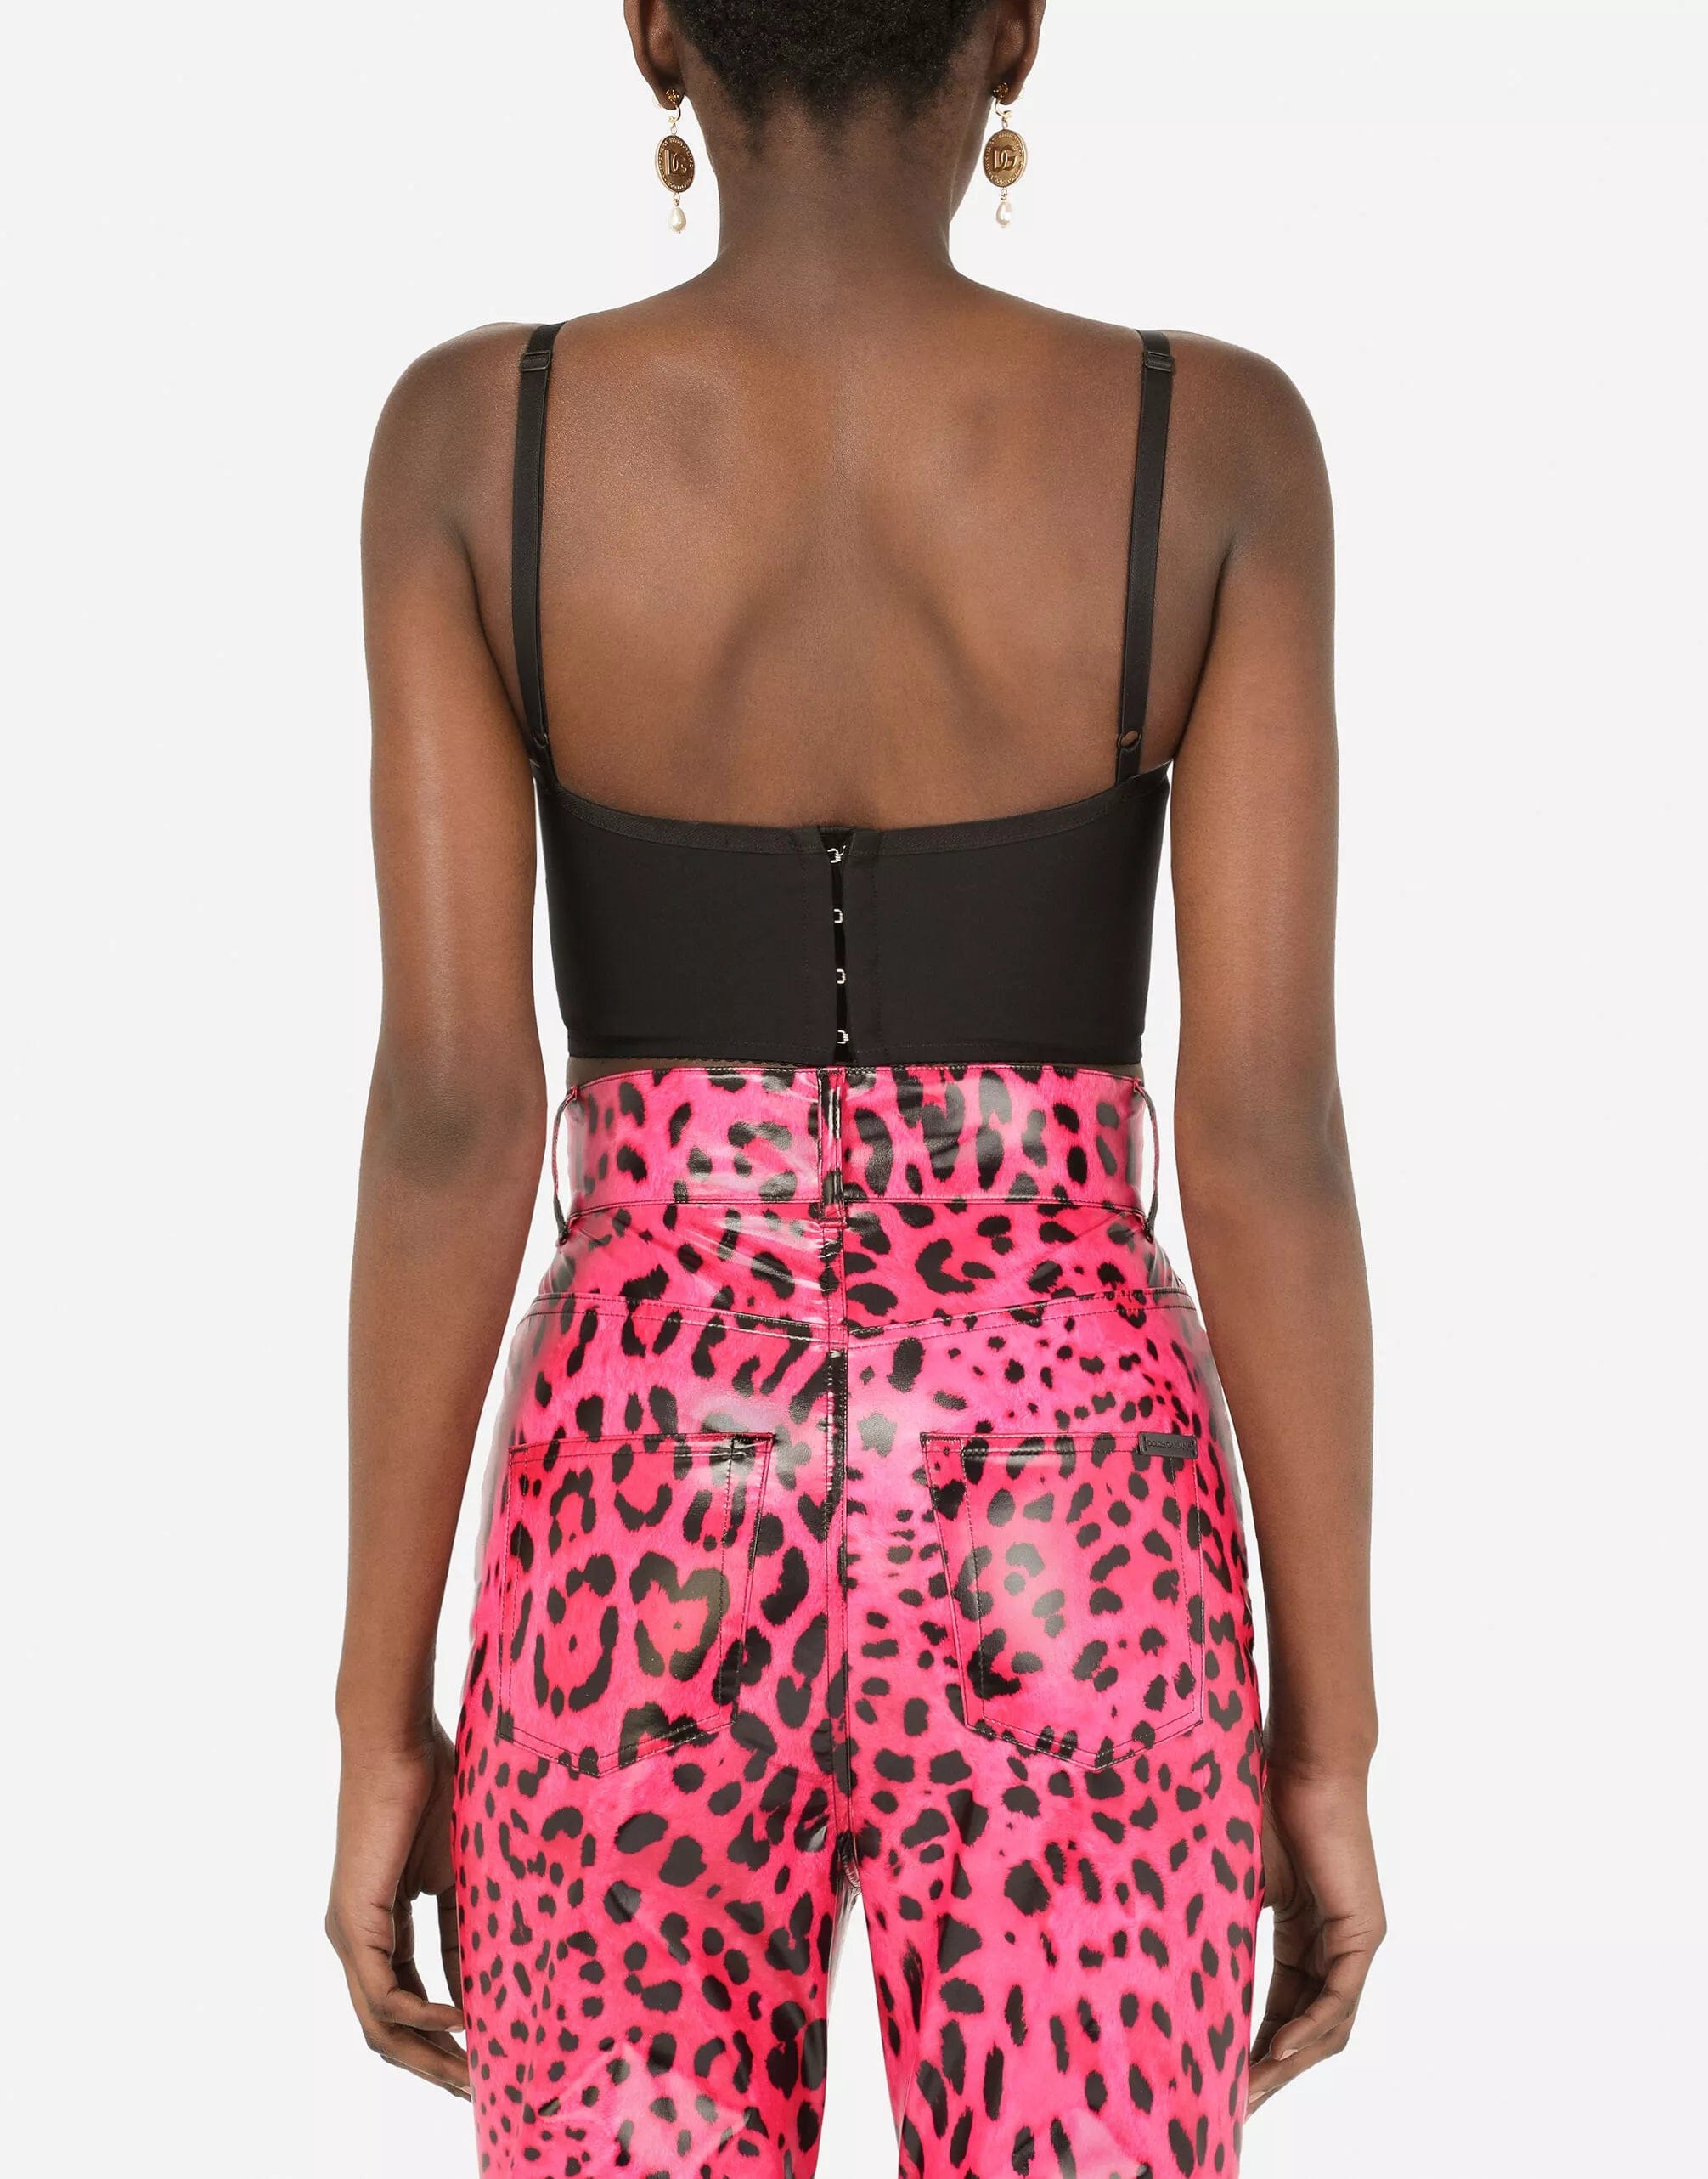 Dolce & Gabbana Foiled Satin Bustier With Neon Leopard Print